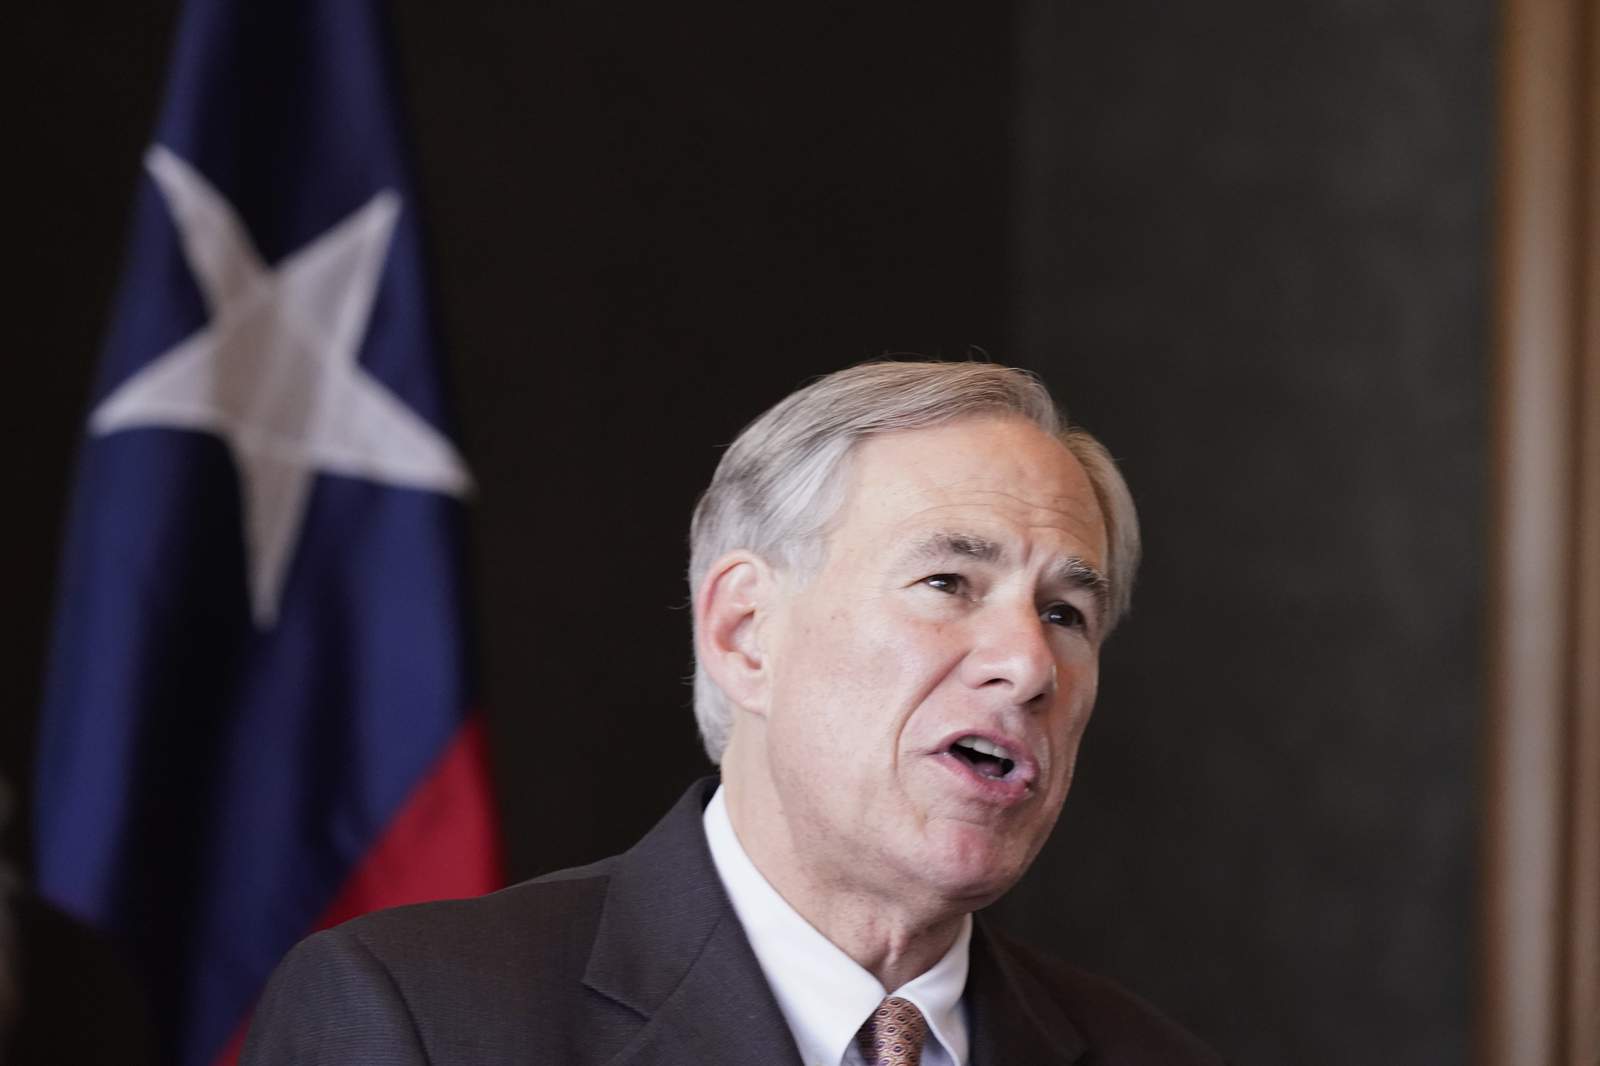 Gov. Abbott announces new outreach partnership to help increase COVID-19 vaccinations among senior citizens